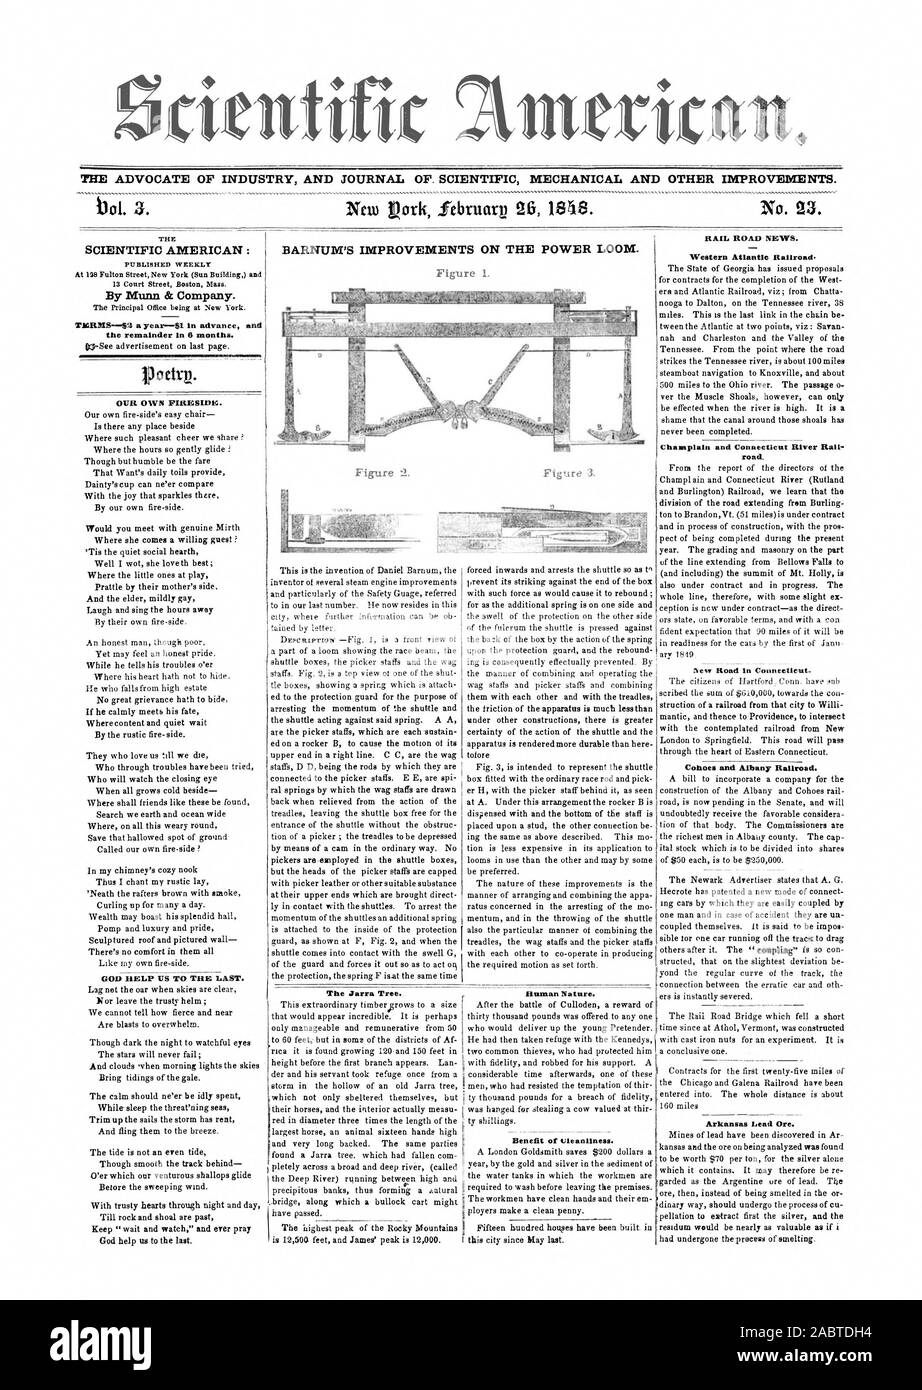 THE ADVOCATE OF INDUSTRY AND JOURNAL OF. SCIENTIFIC MECHANICAL AND OTHER  IMPROVEMENTS. bol. 3. Ntiu pork februarv 26 ISIS. No. 23. BARNUM'S  IMPROVEMENTS ON THE POWER LOOM. Figure 1 SCIENTIFIC AMERICAN: By